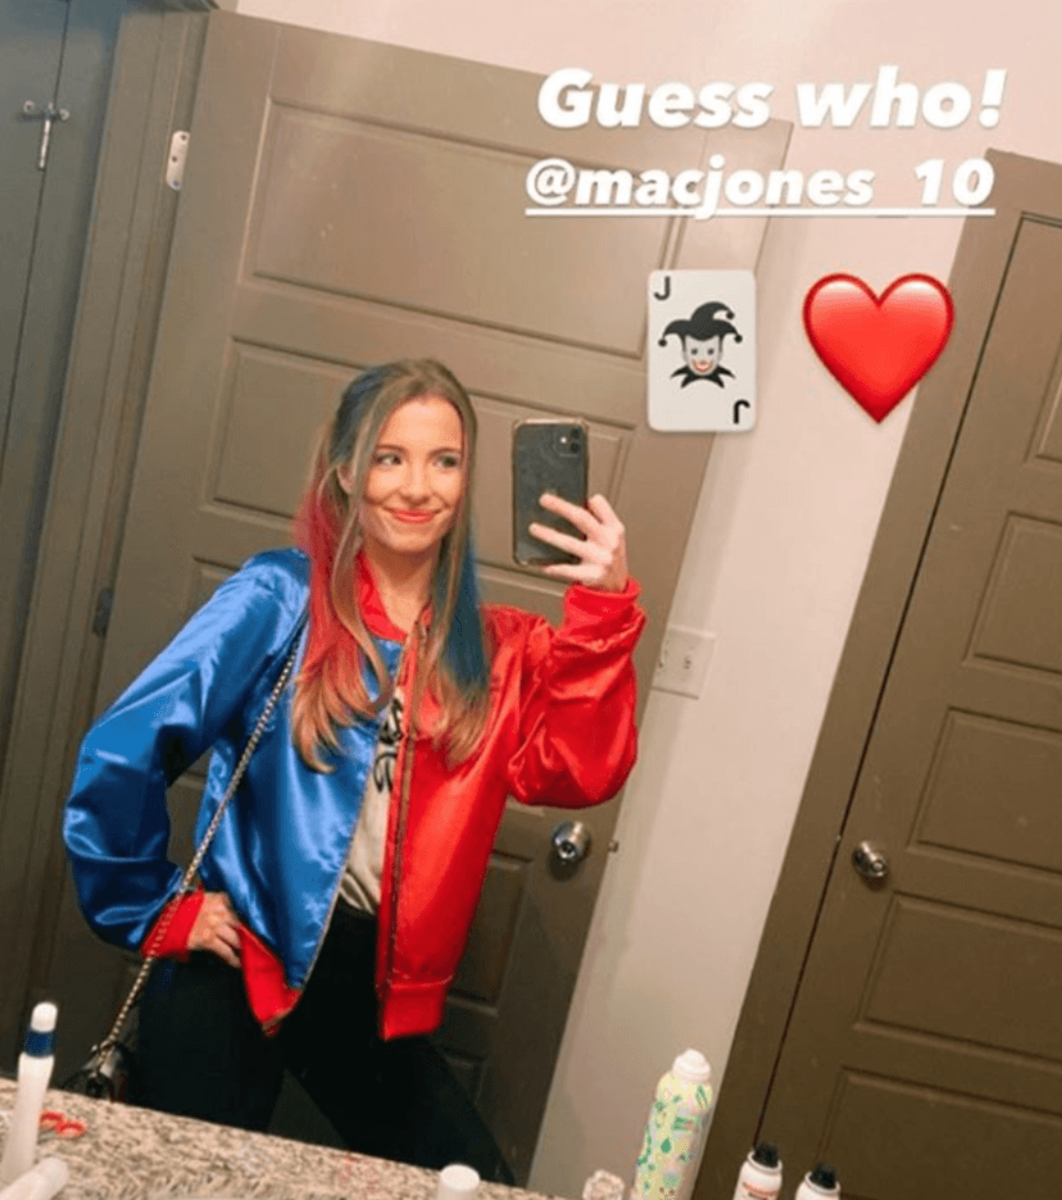 Sophie Scott shows off her outfit on IG.